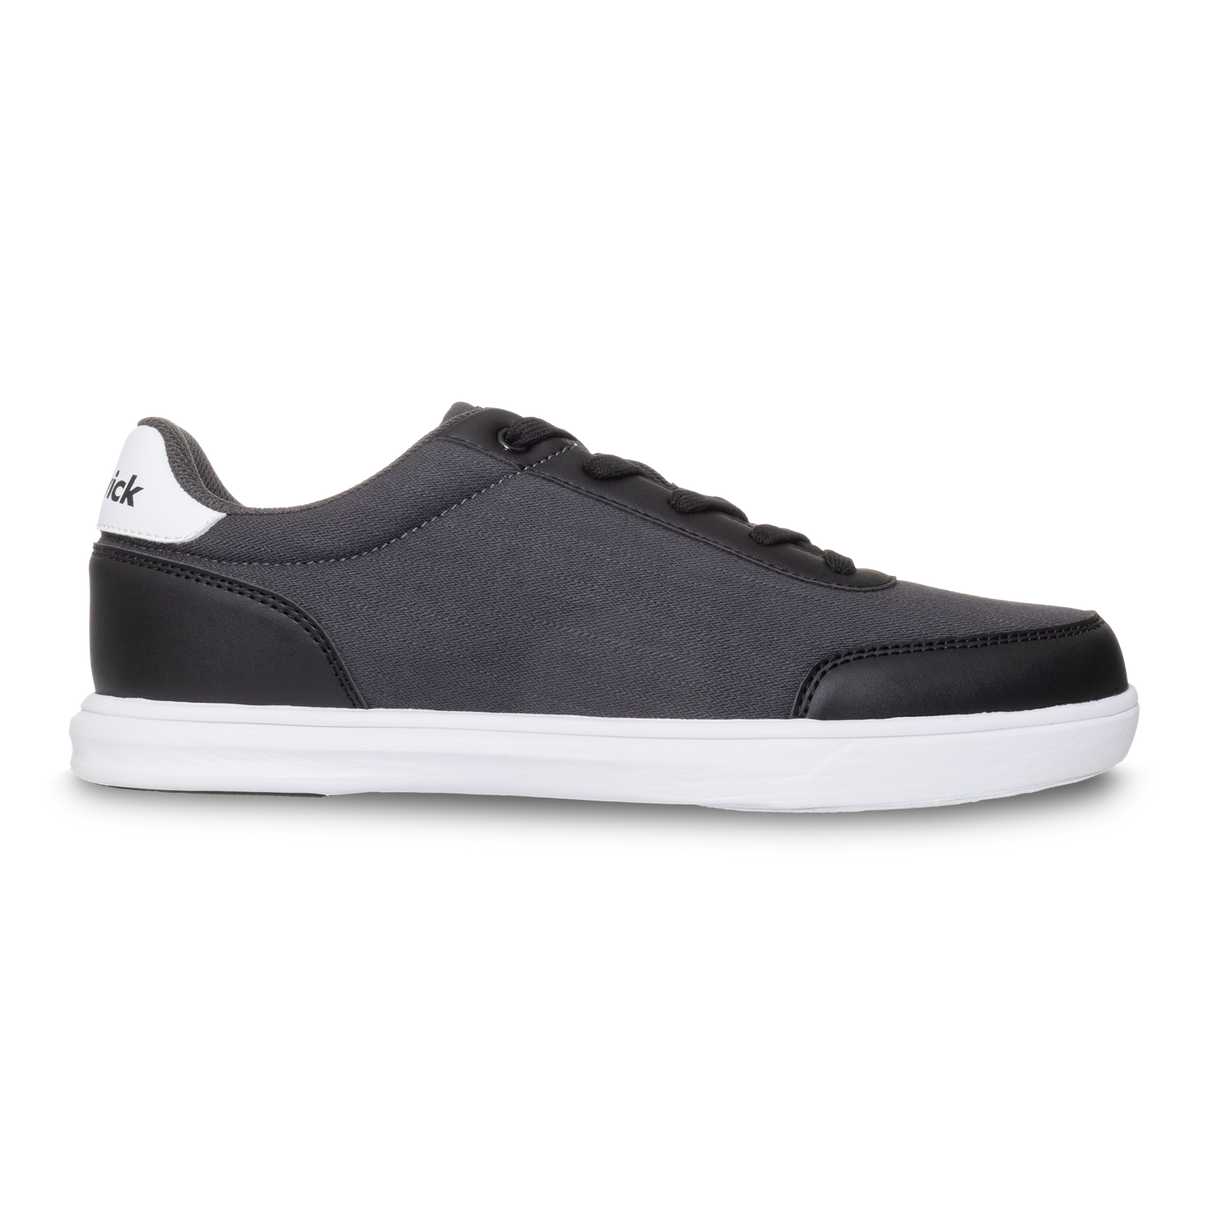 Brunswick Scholar Charcoal Bowling Shoes * Lightweight casual canvas upper * Pure Slide microfiber Slide Soles on both shoes * Foam padded collar and tongue * Extra-light EVA outsole * Lace-up for adjustable fit *  * 